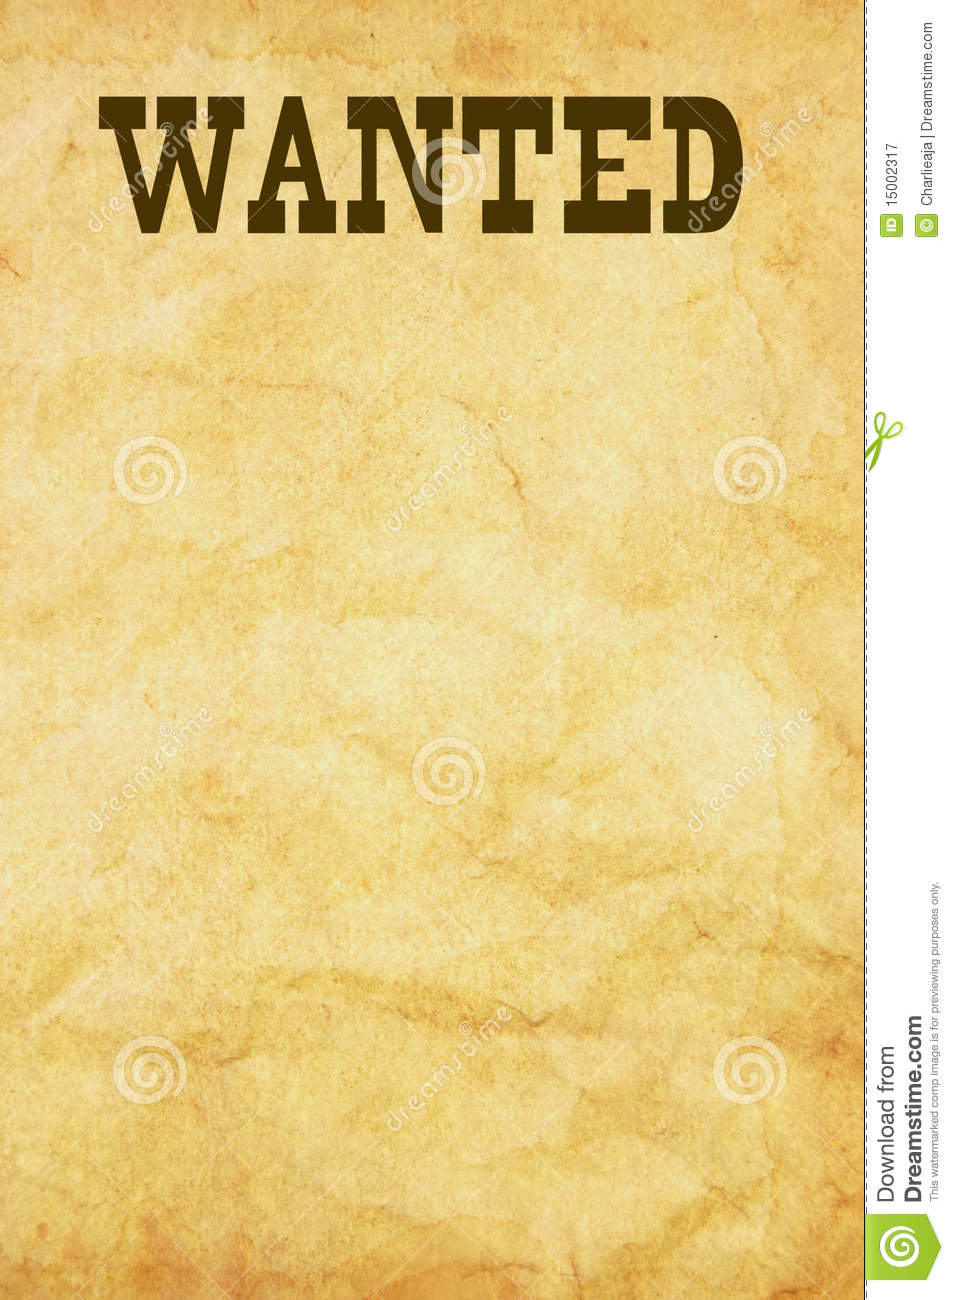 013 Free Wanted Poster Template Printable Ideas ~ Ulyssesroom - Wanted Poster Printable Free